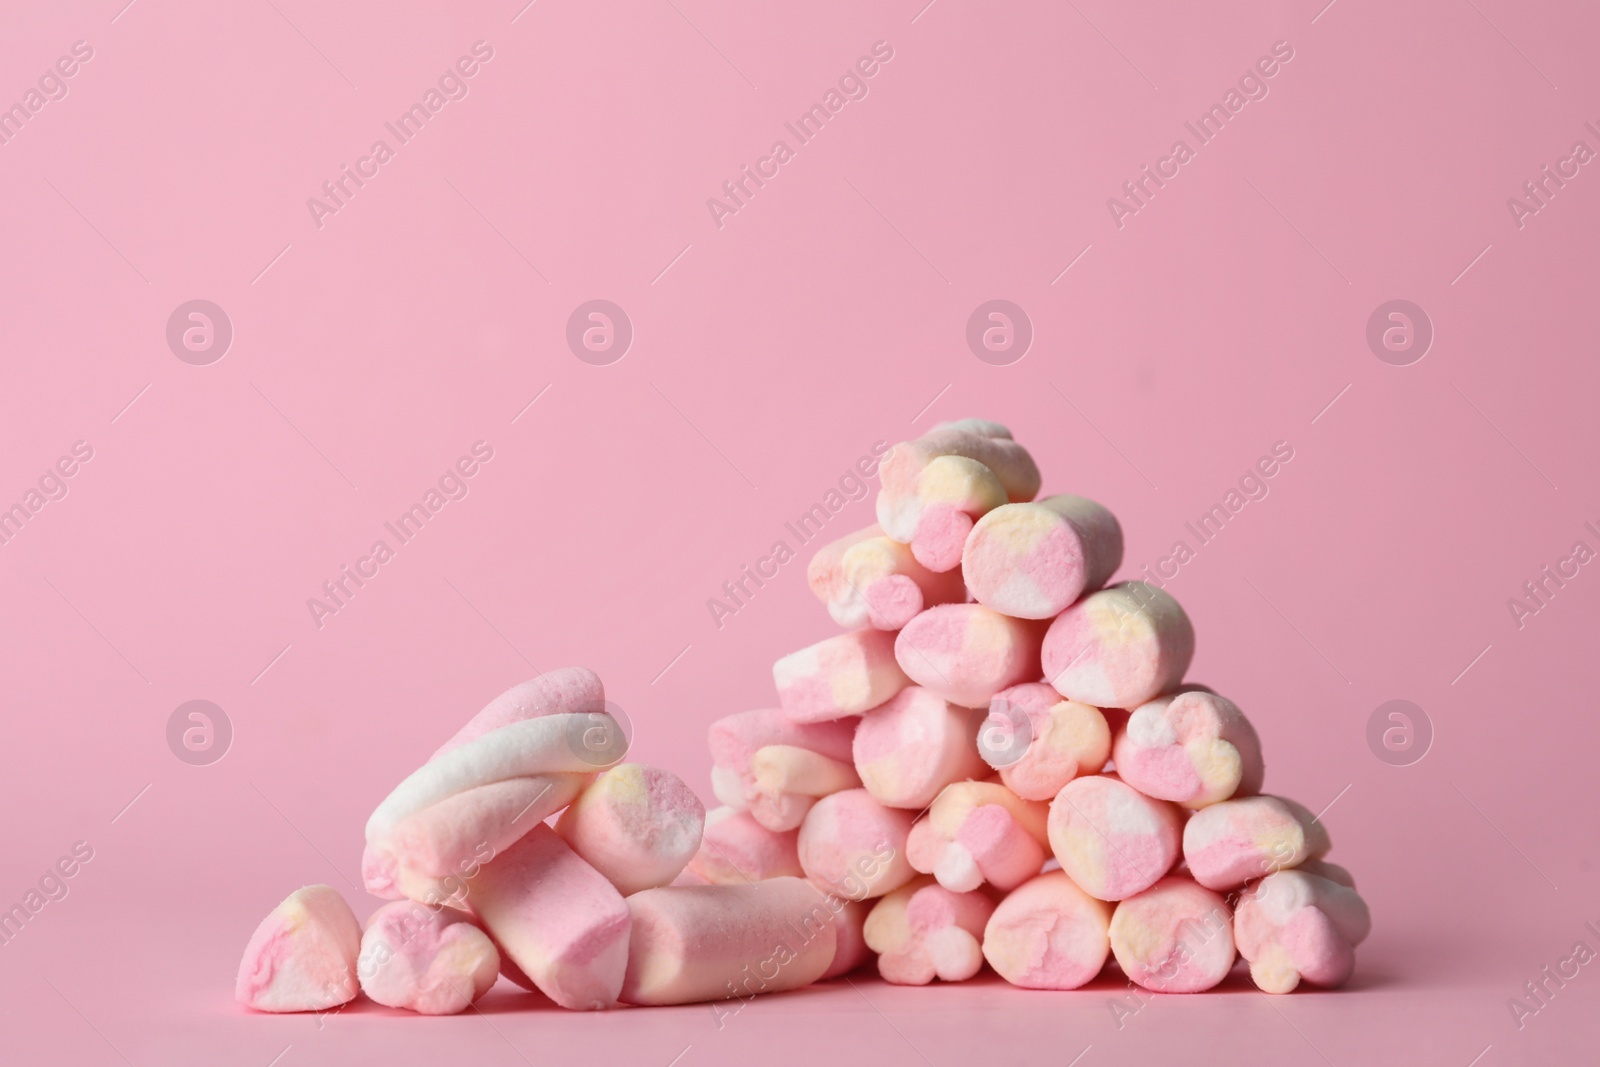 Photo of Stack of tasty marshmallows on pink background